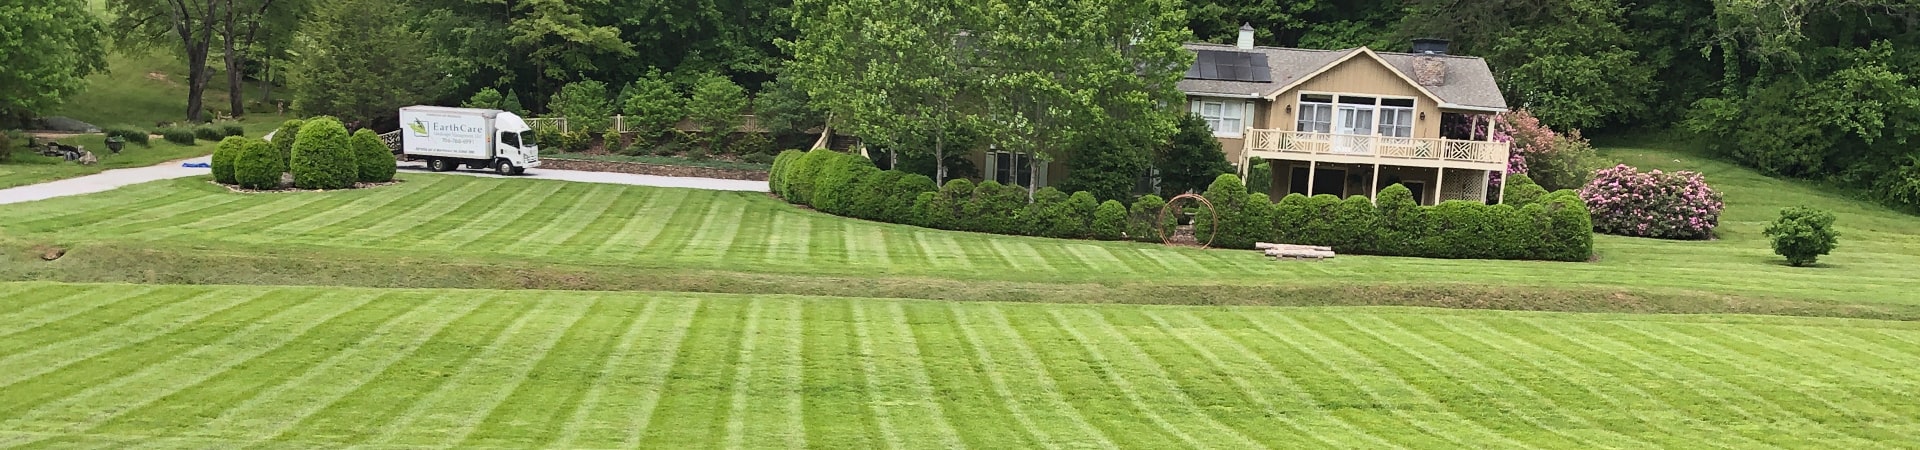 Will You Be Ready When Your Lawn Wakes Up? - EarthCare Landscape Management